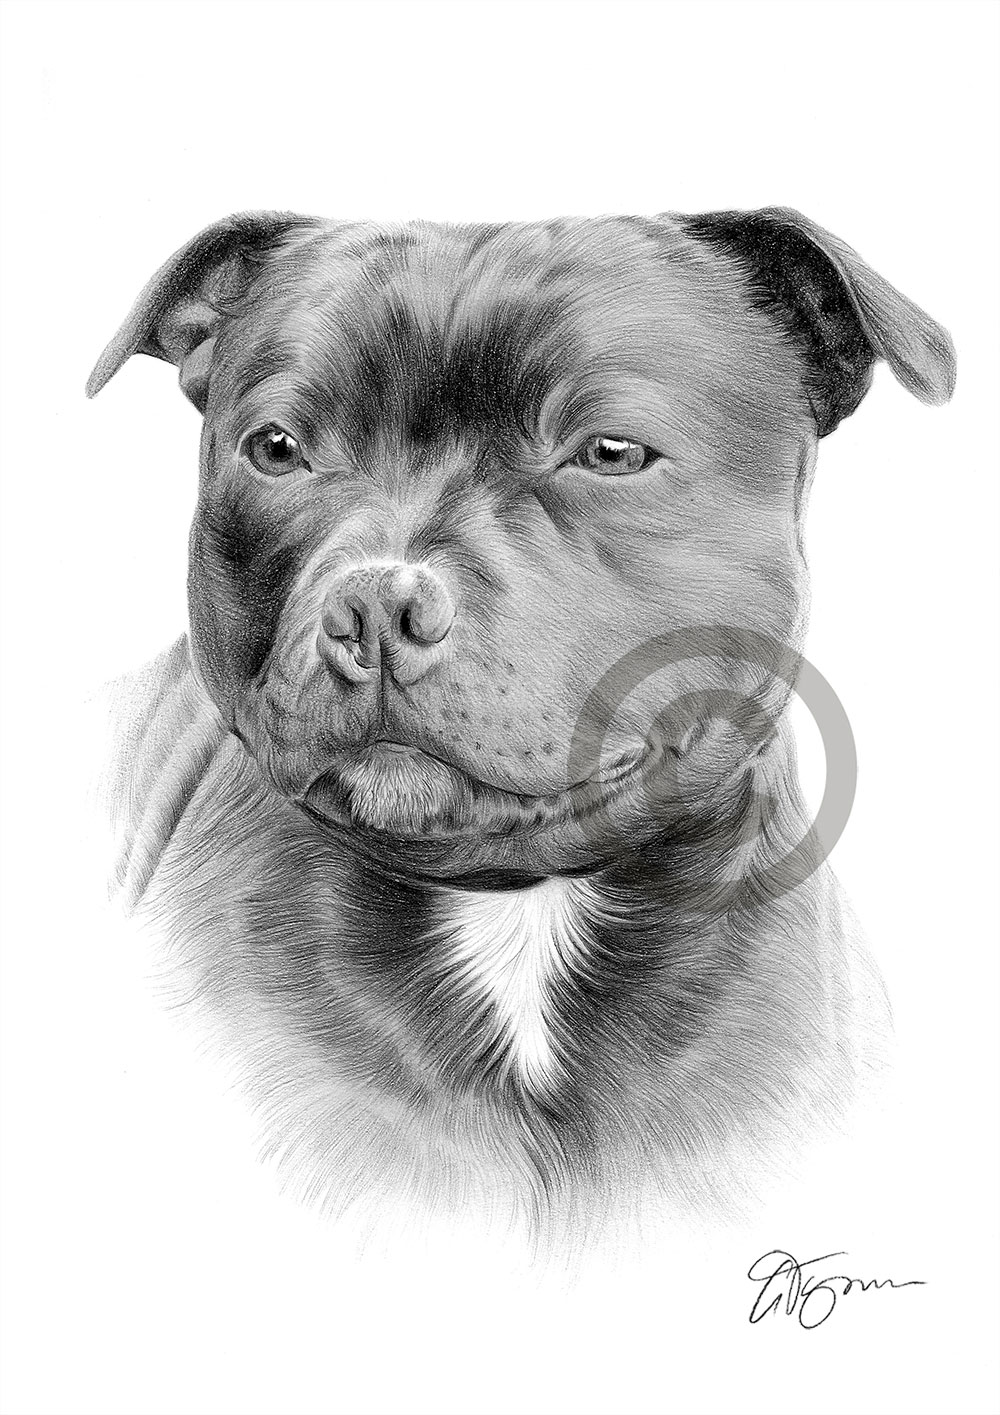 Pencil drawing of a staffordshire bull terrier by artist Gary Tymon